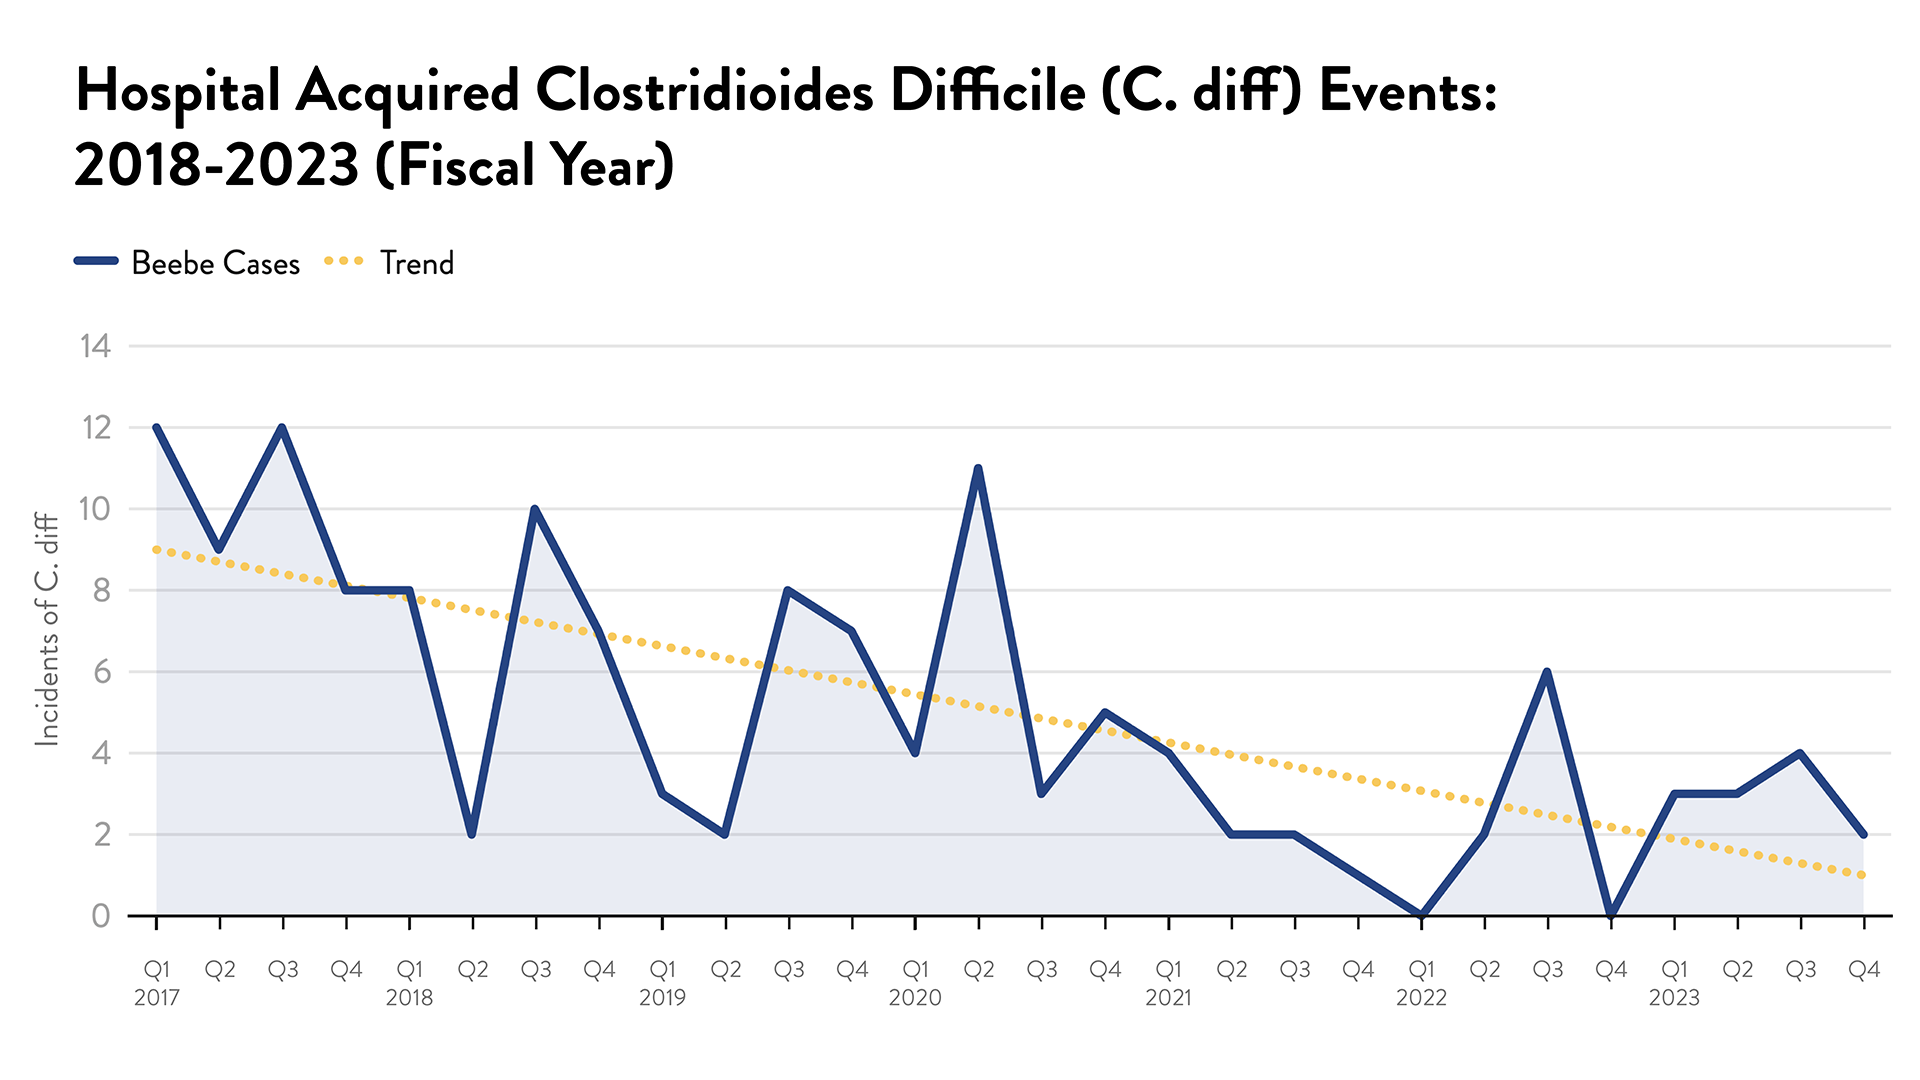 Hospital Acquired Clostridioides Difficile (C. diff) Events: 2018-2023 (fiscal year)